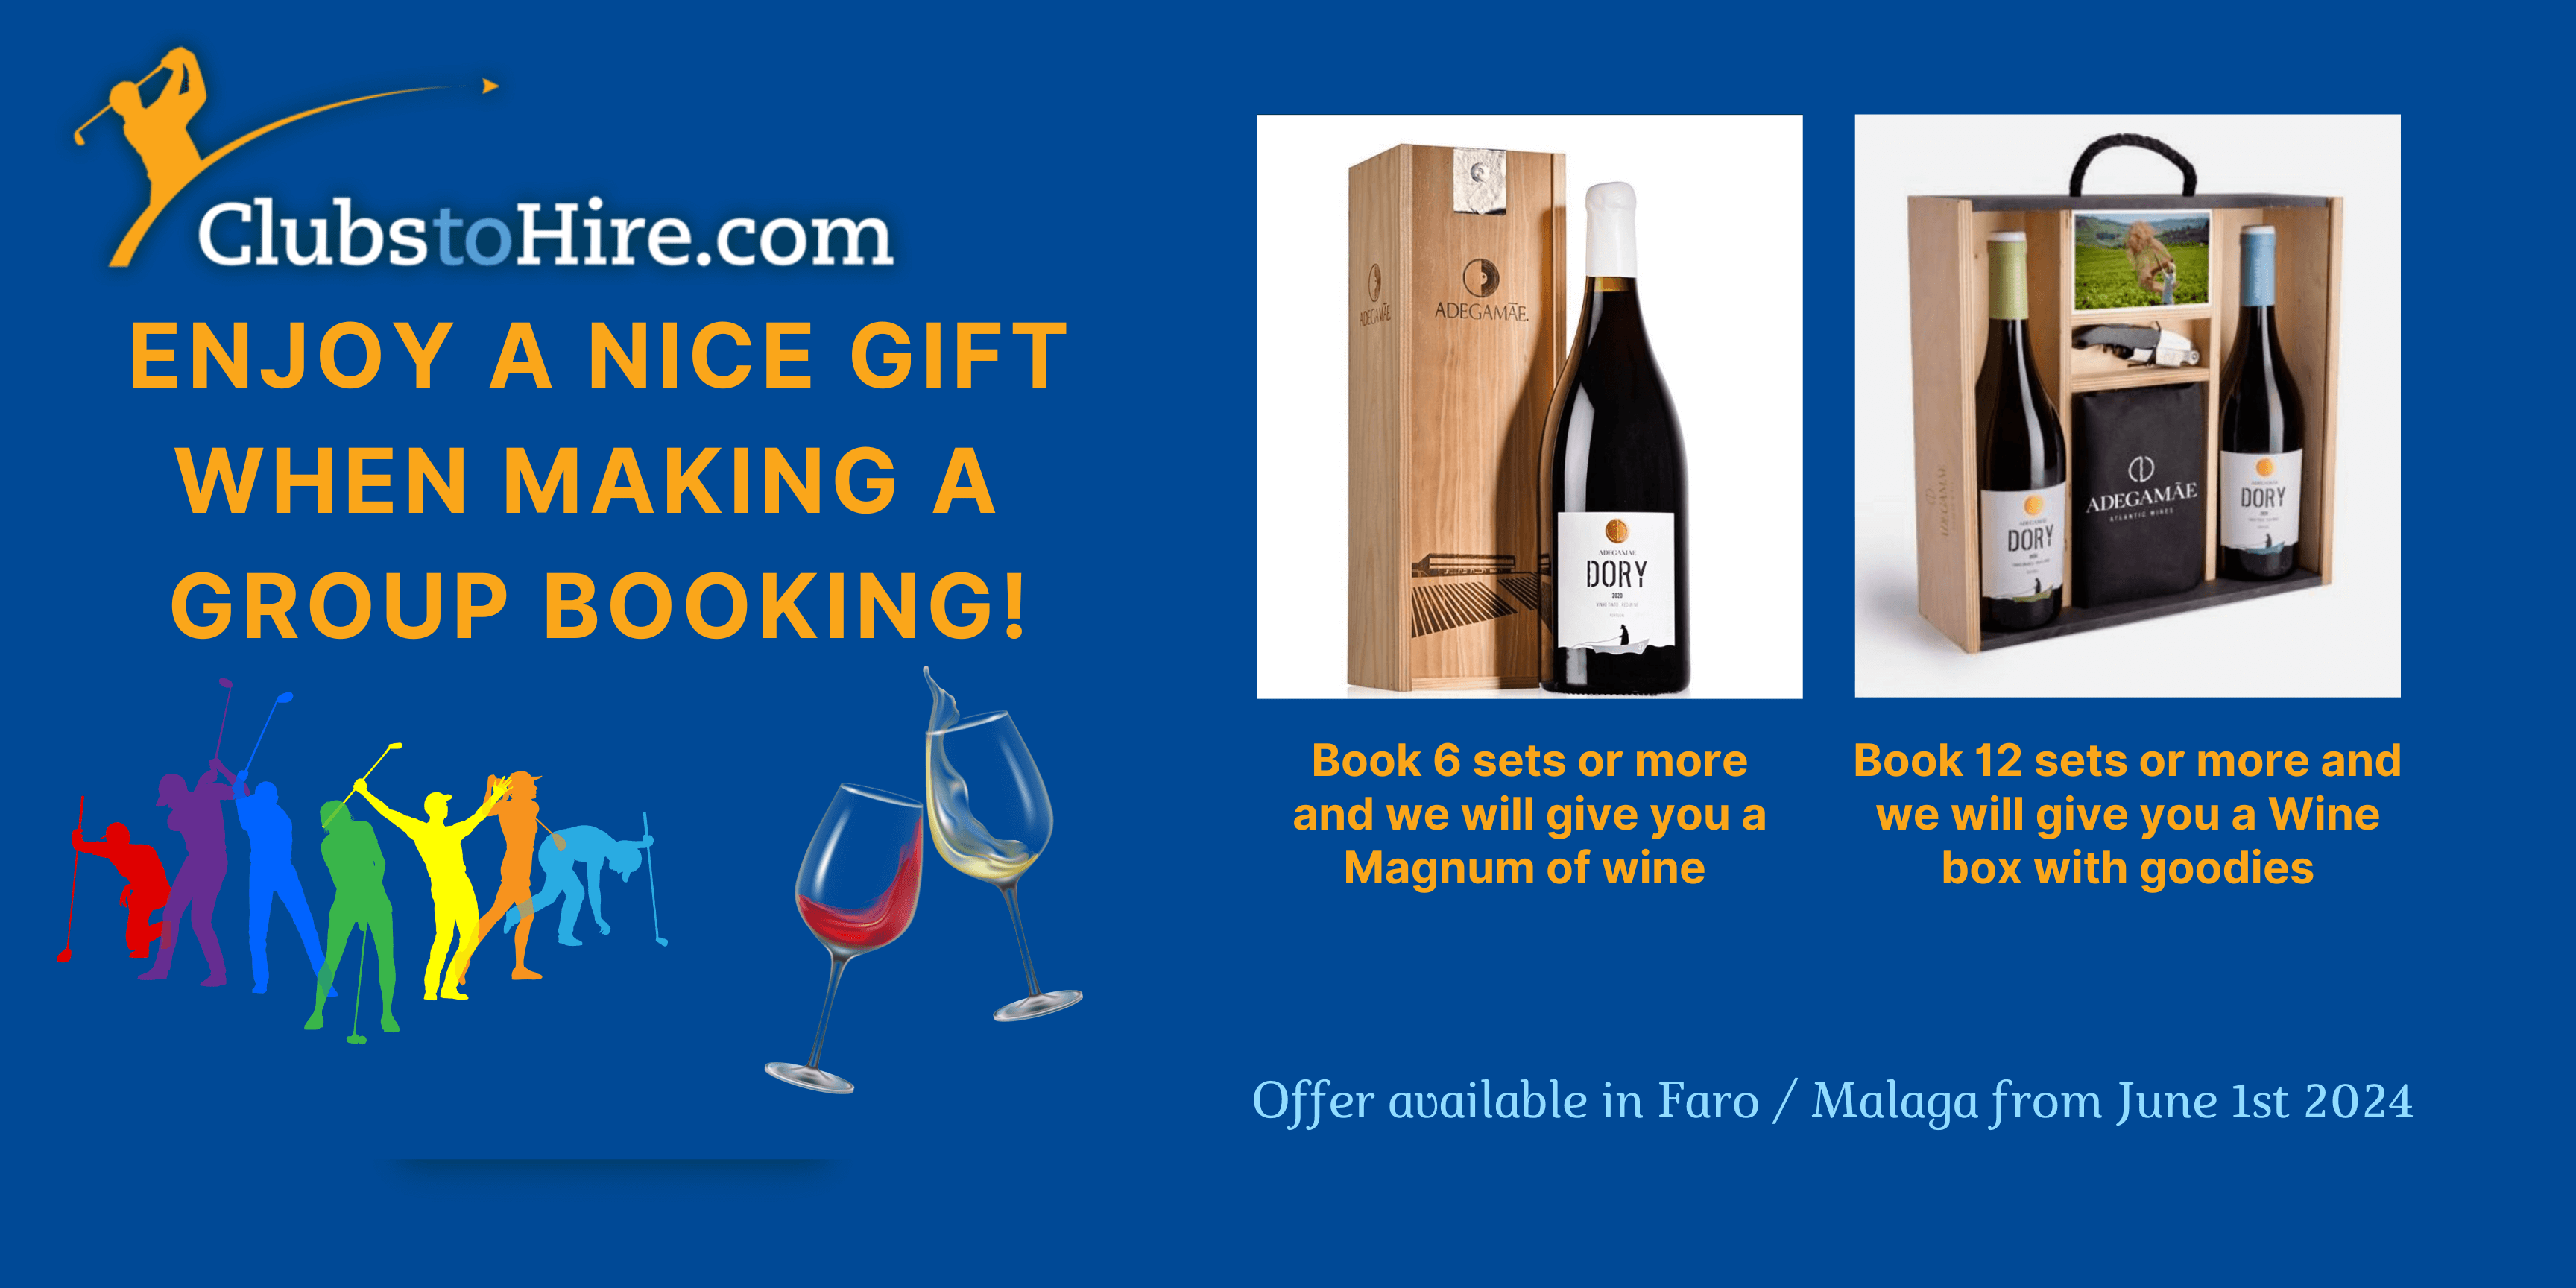 Book 6 sets or more and we will give you a Magnum of wine